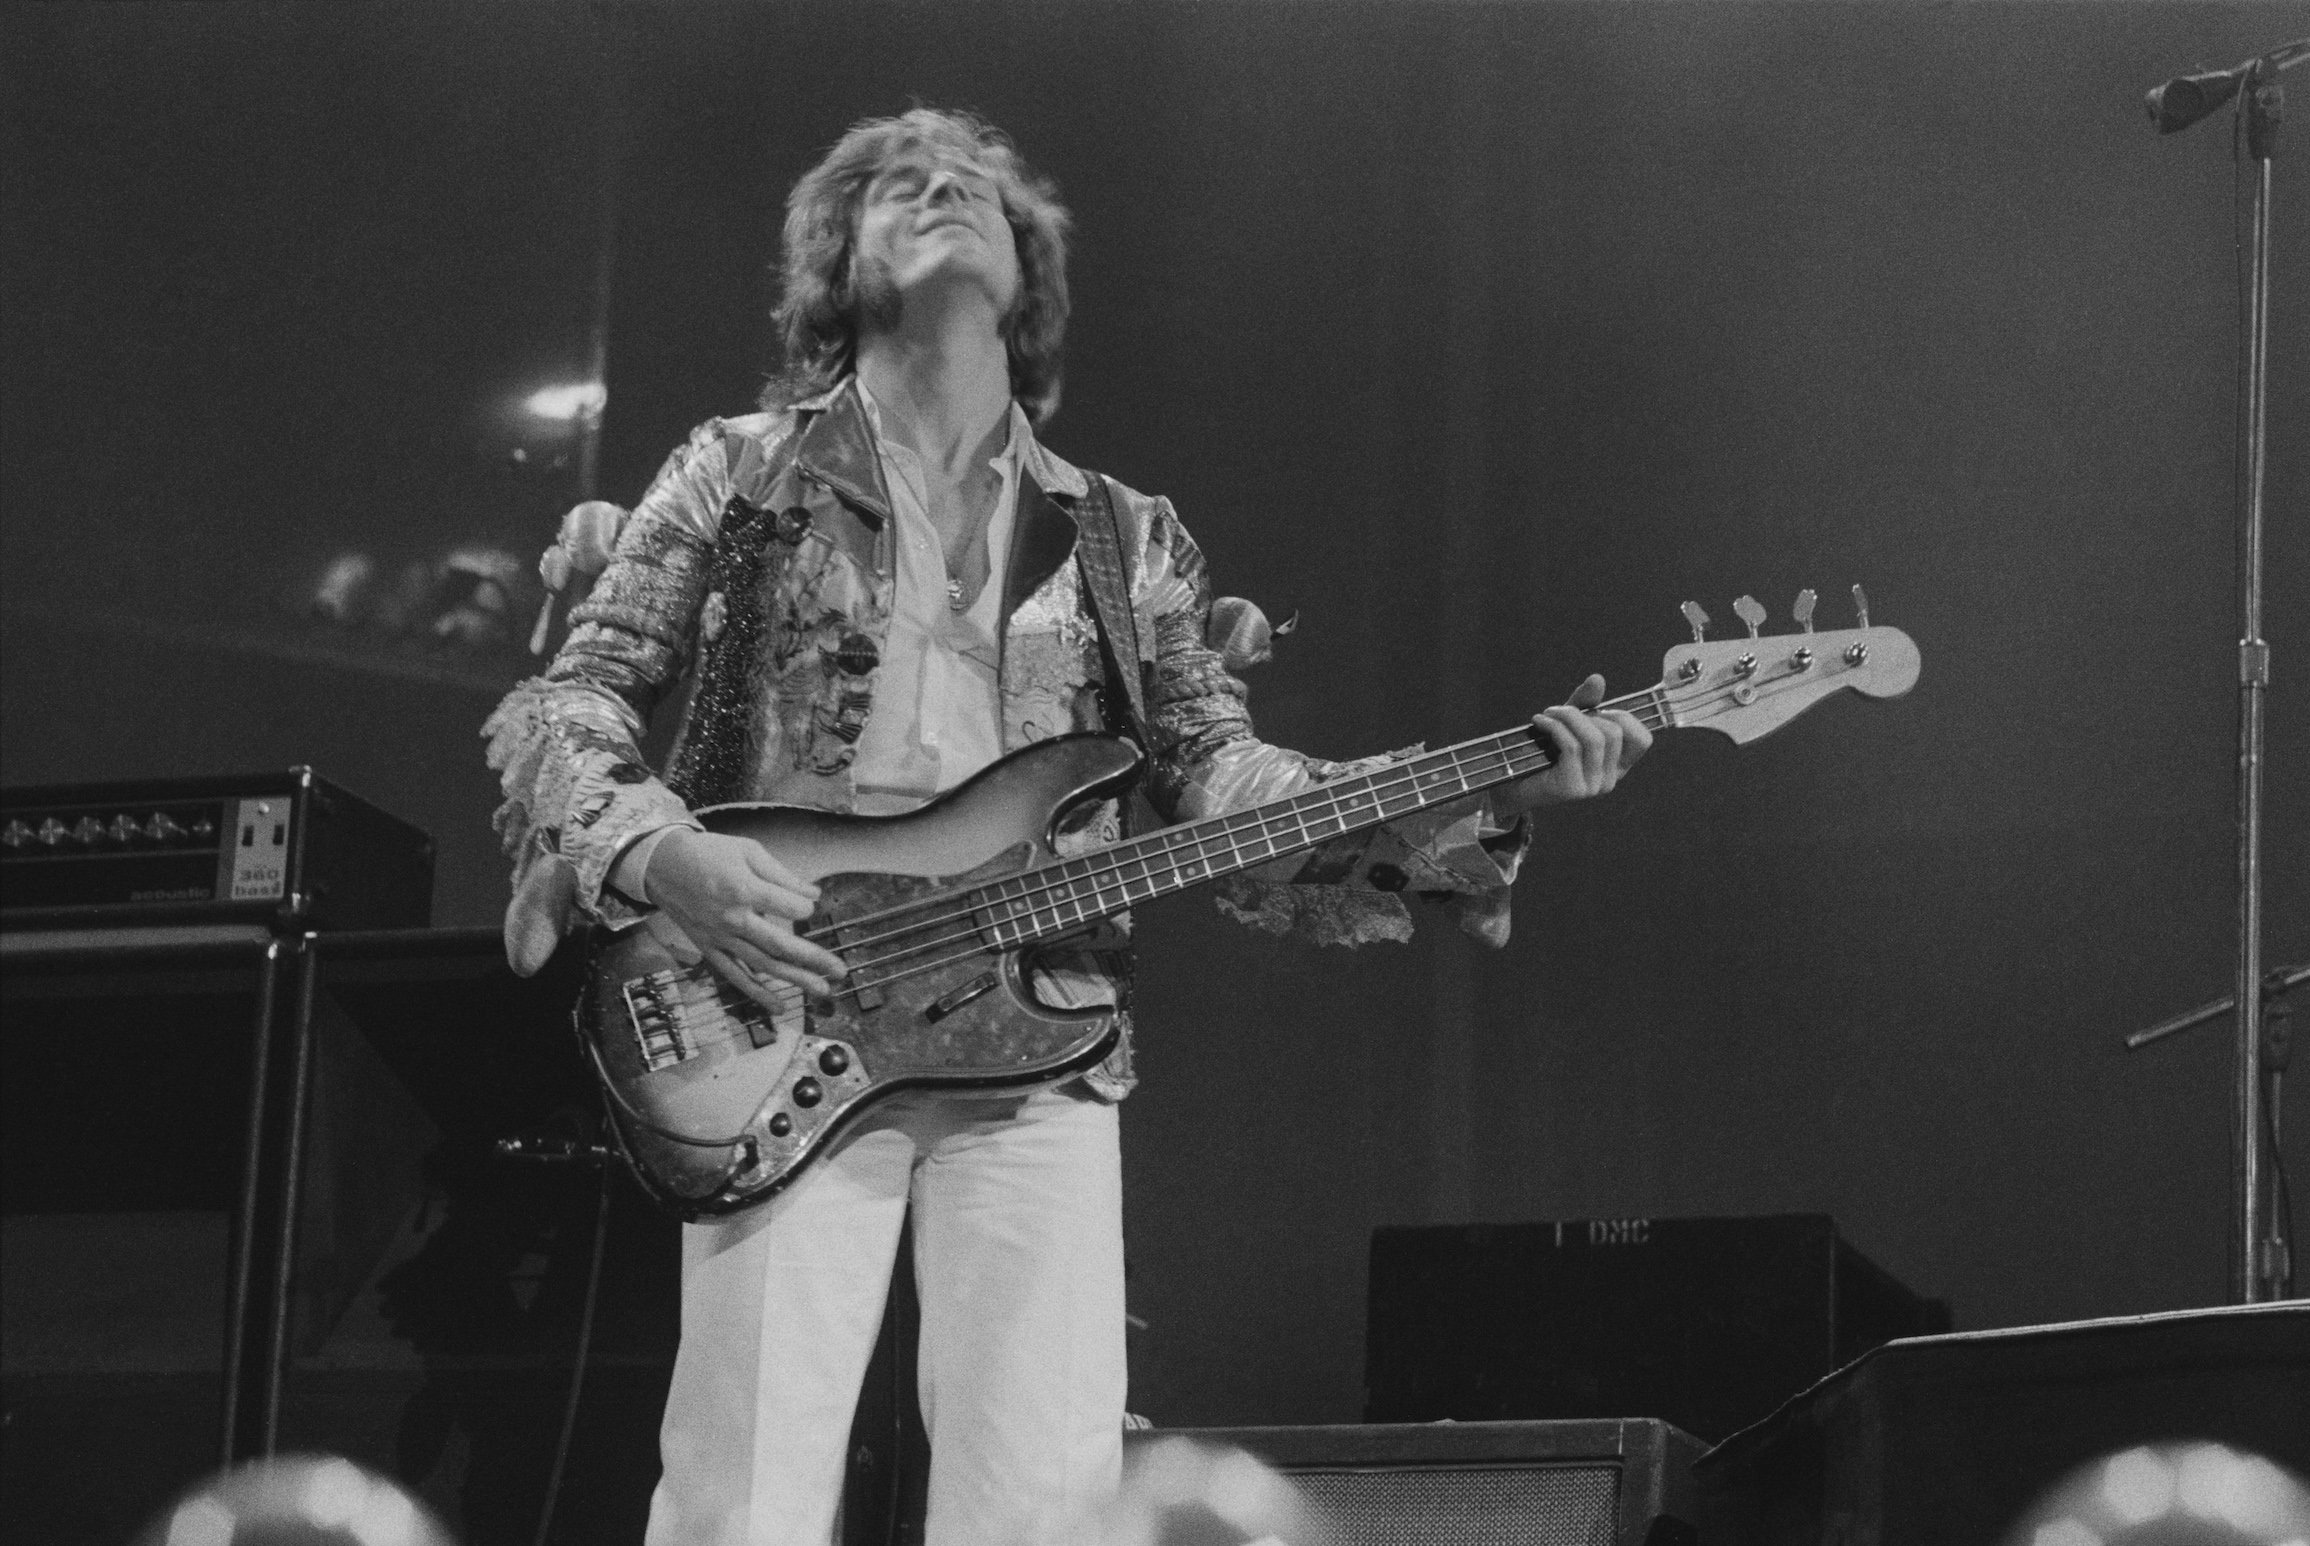 John Paul Jones performs with Led Zeppelin at Earl's Court in London in 1975